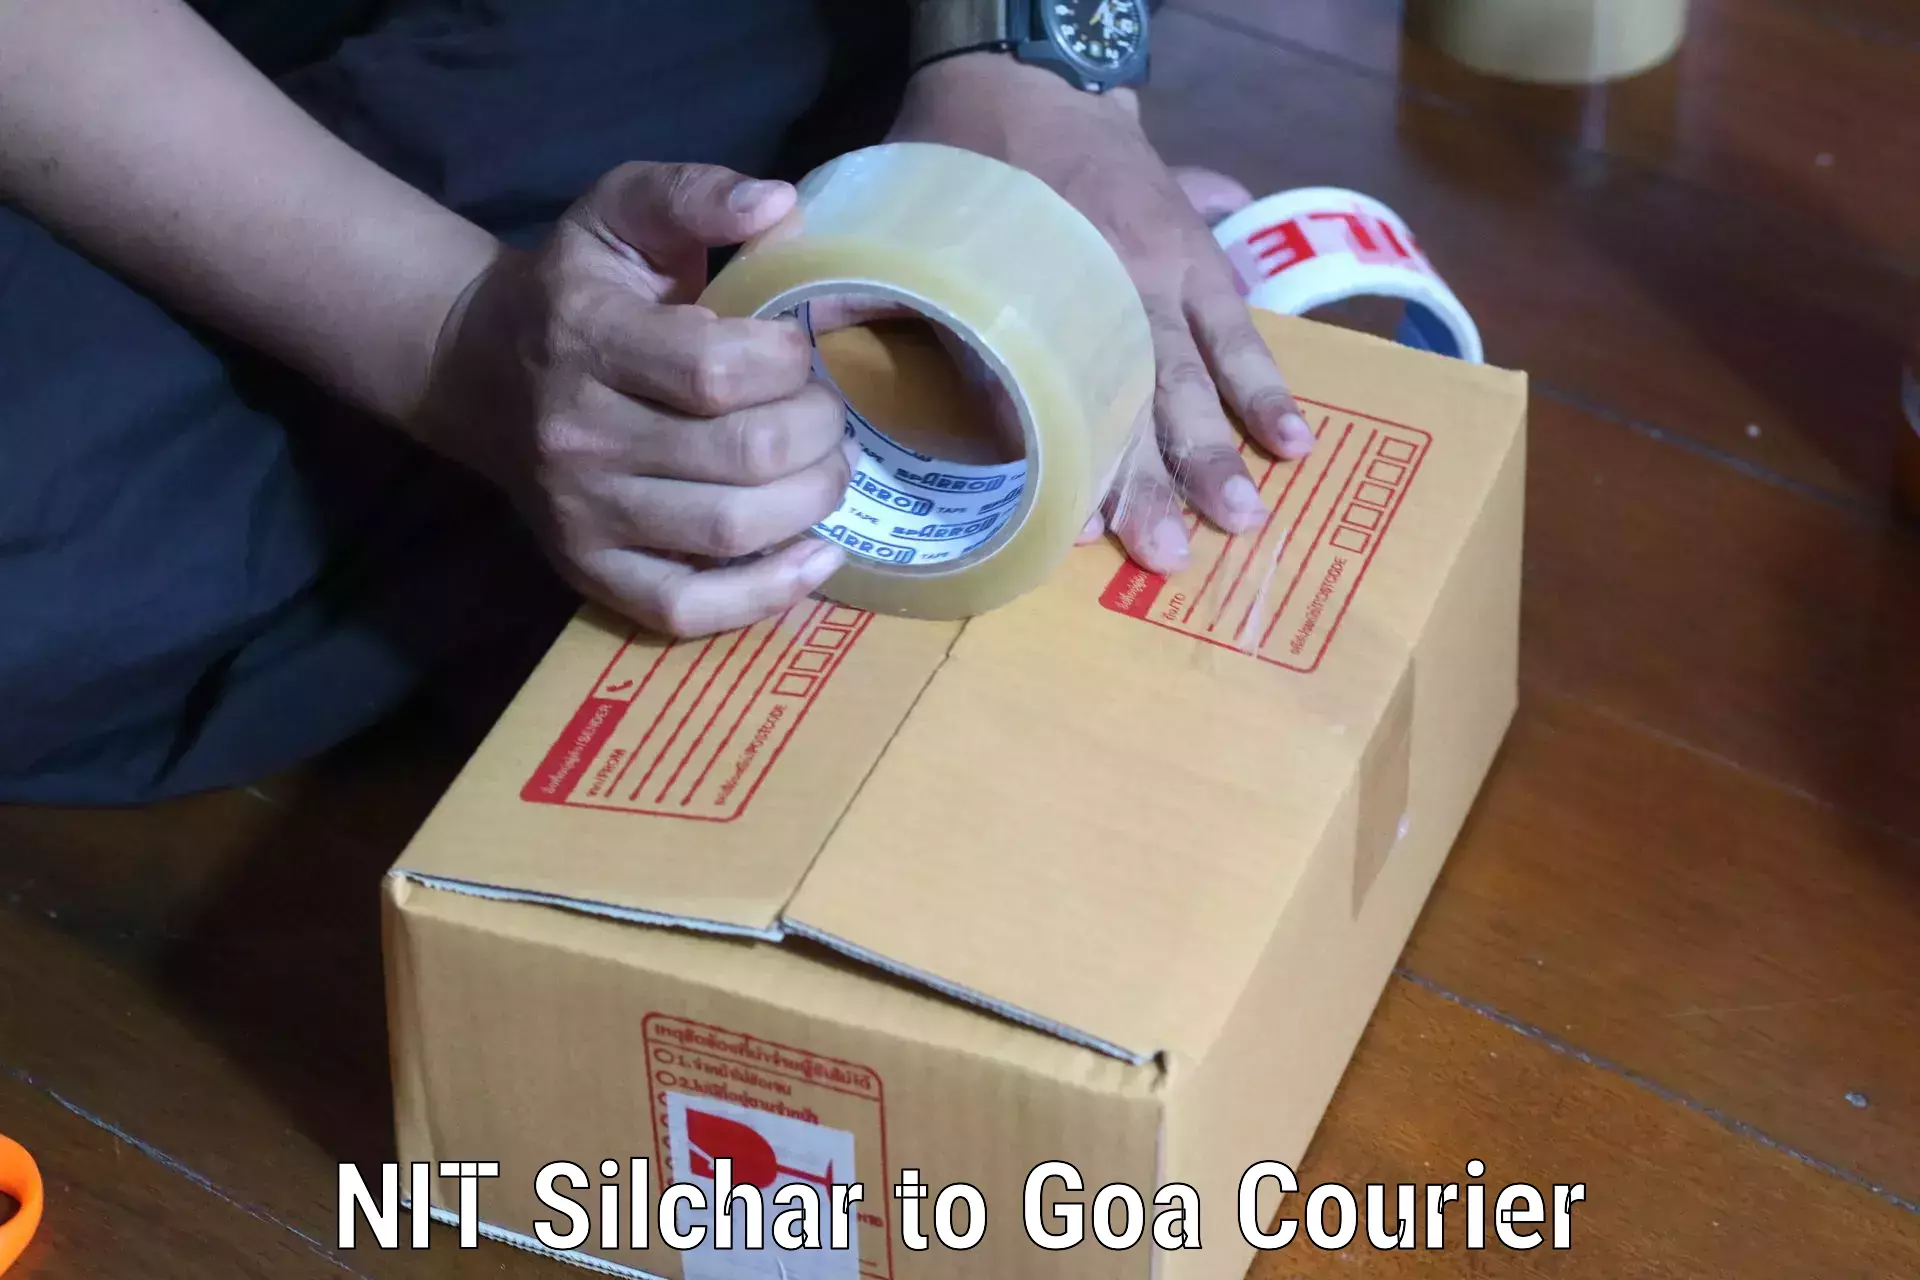 International courier networks NIT Silchar to IIT Goa